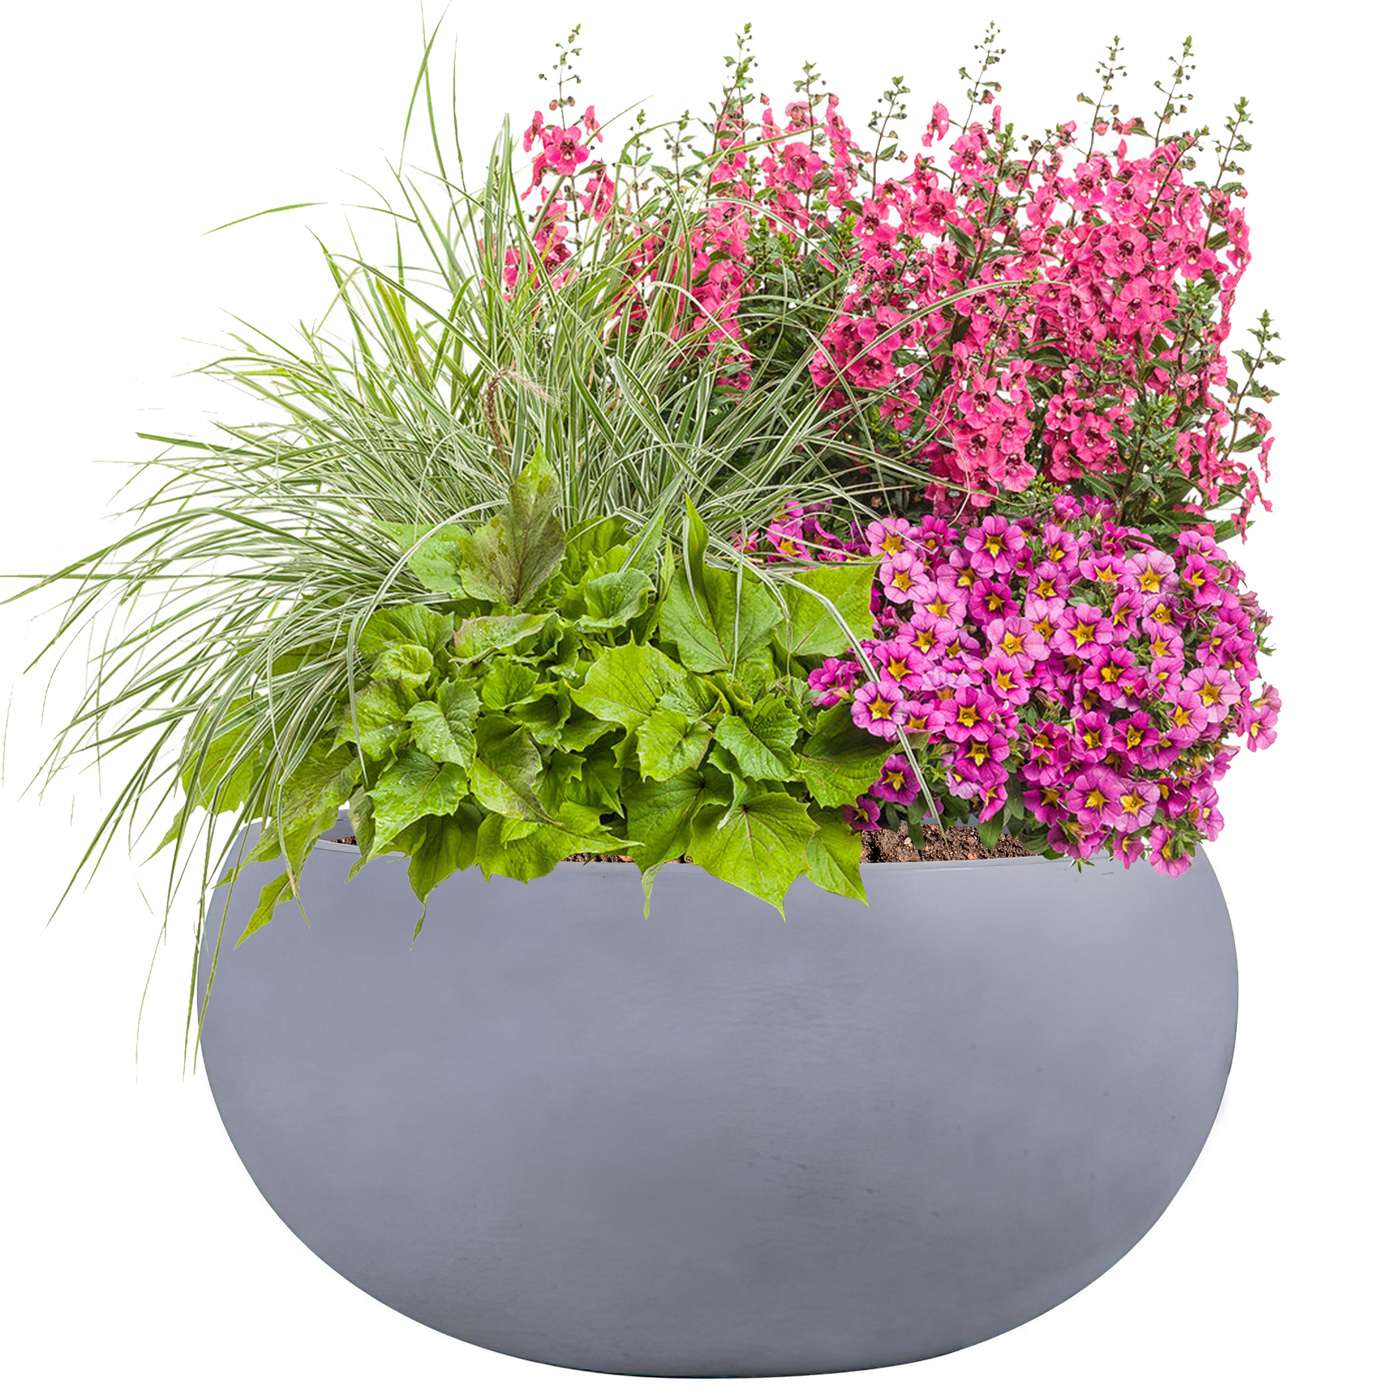 Classic Smooth Light Grey Bowl Outdoor Planter D30.5 H14 cm, 10.2 ltrs Cap.